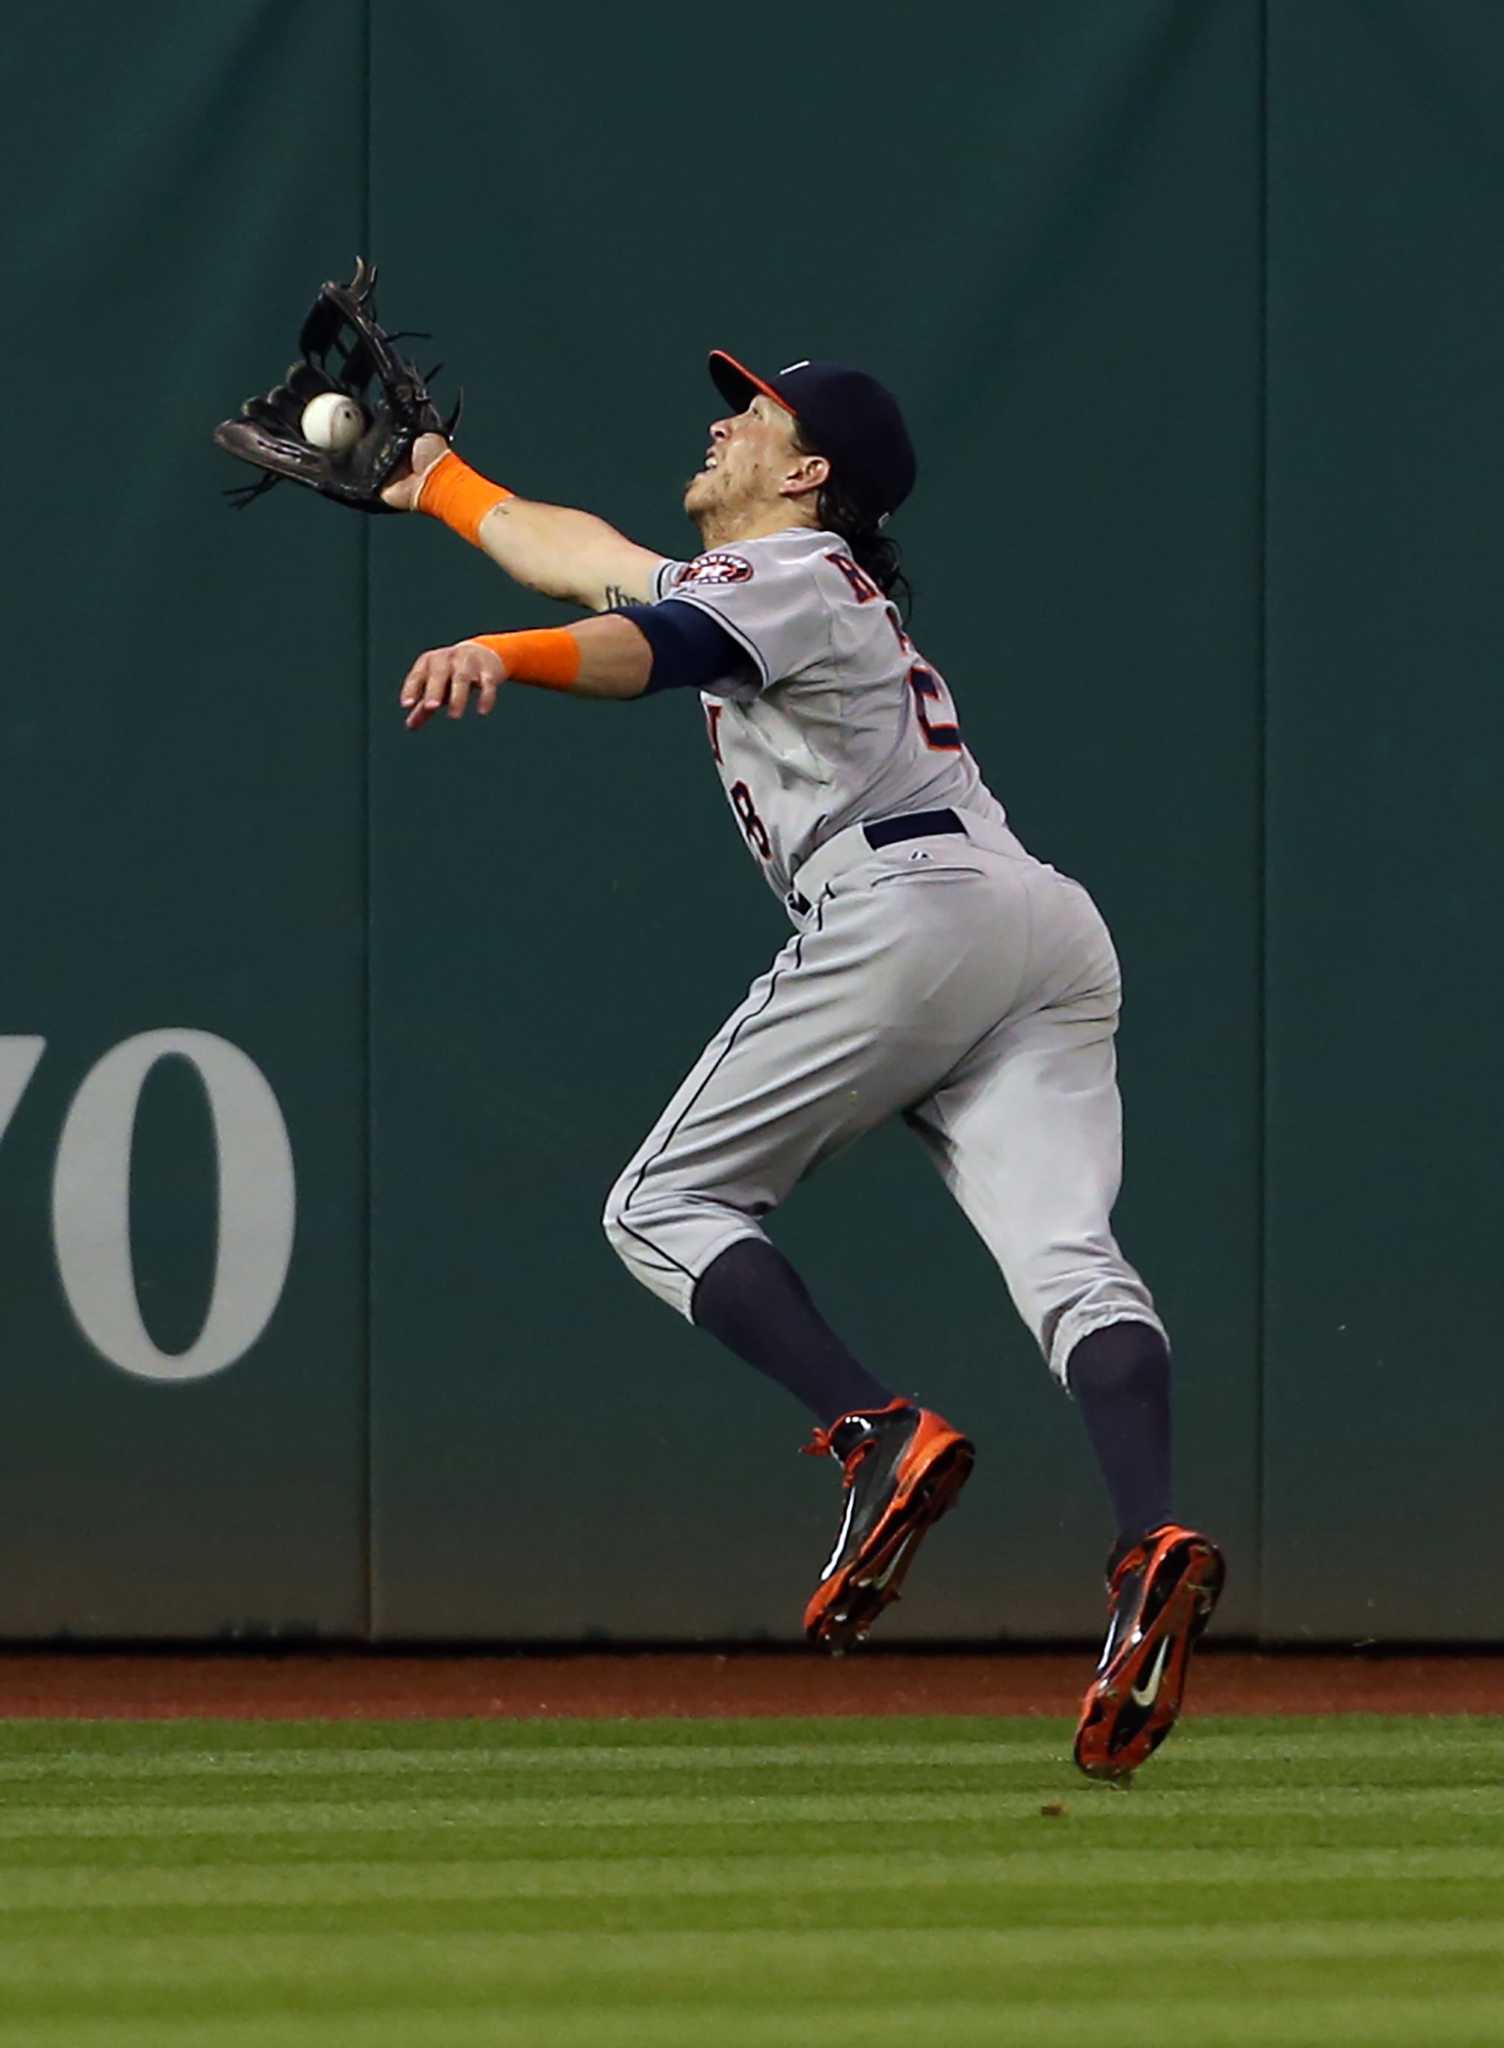 Houston Astros center fielder Michael Bourn catches a fly ball on